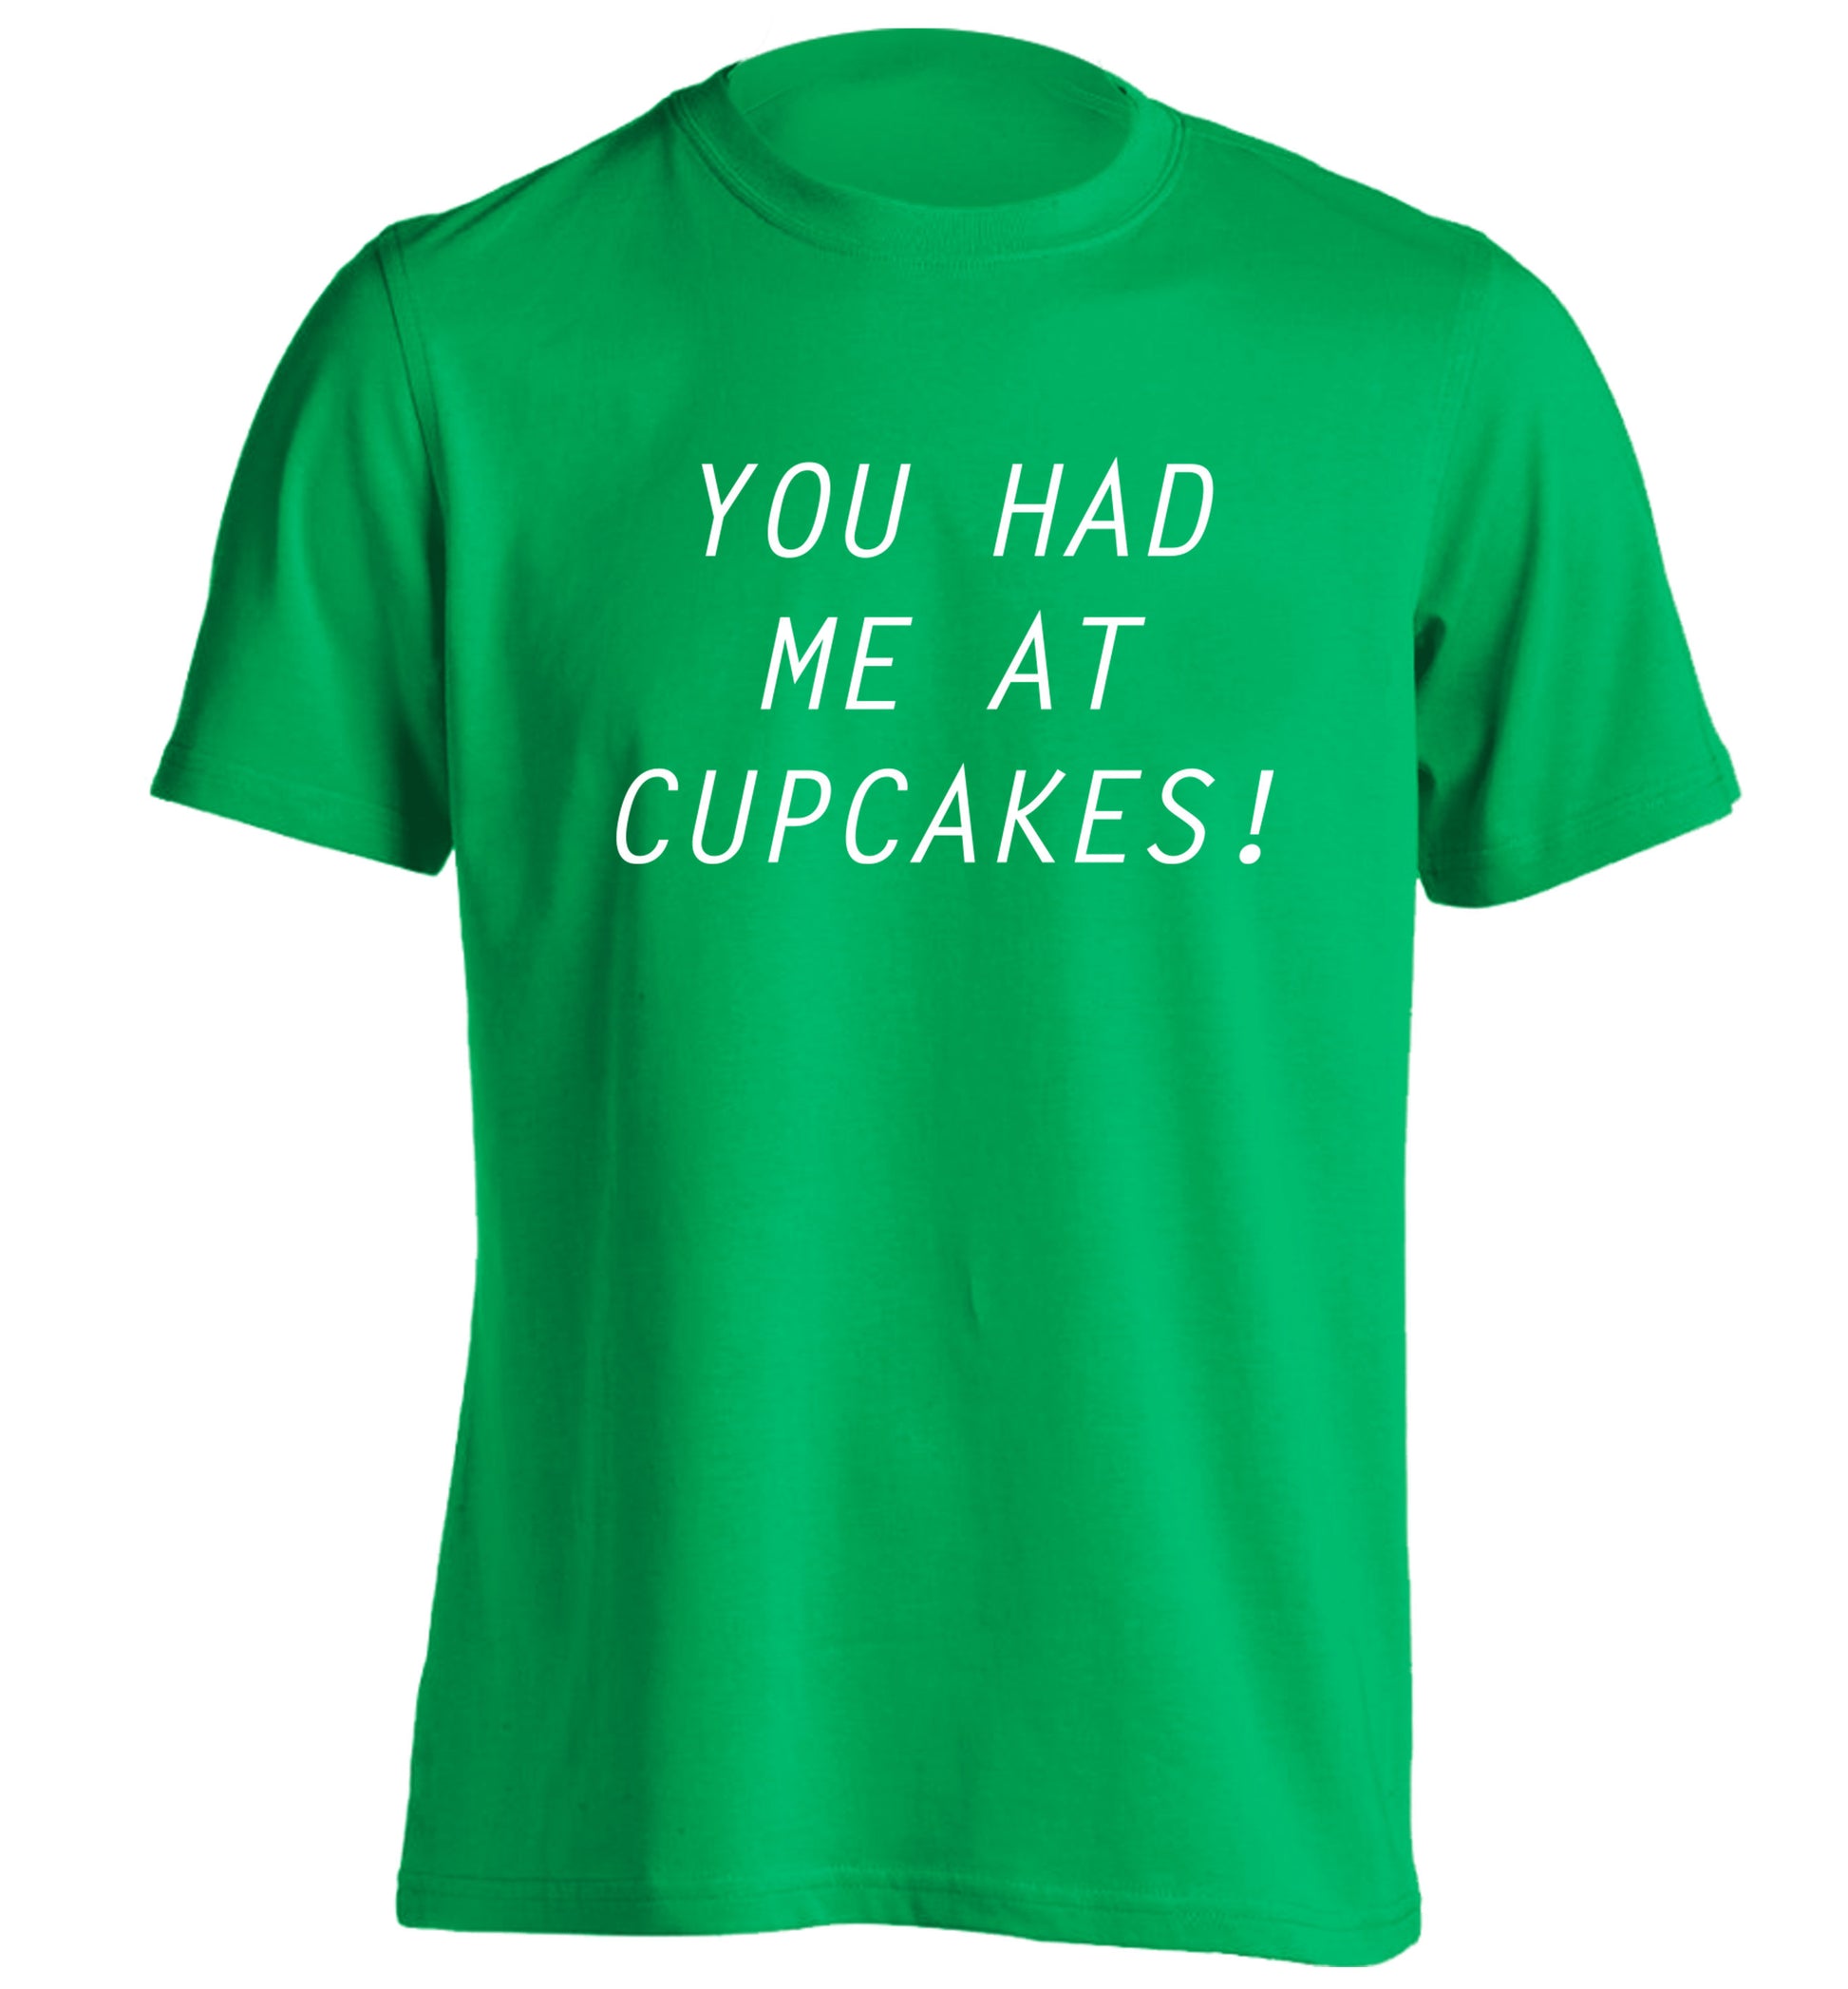 You had me at cupcakes adults unisex green Tshirt 2XL